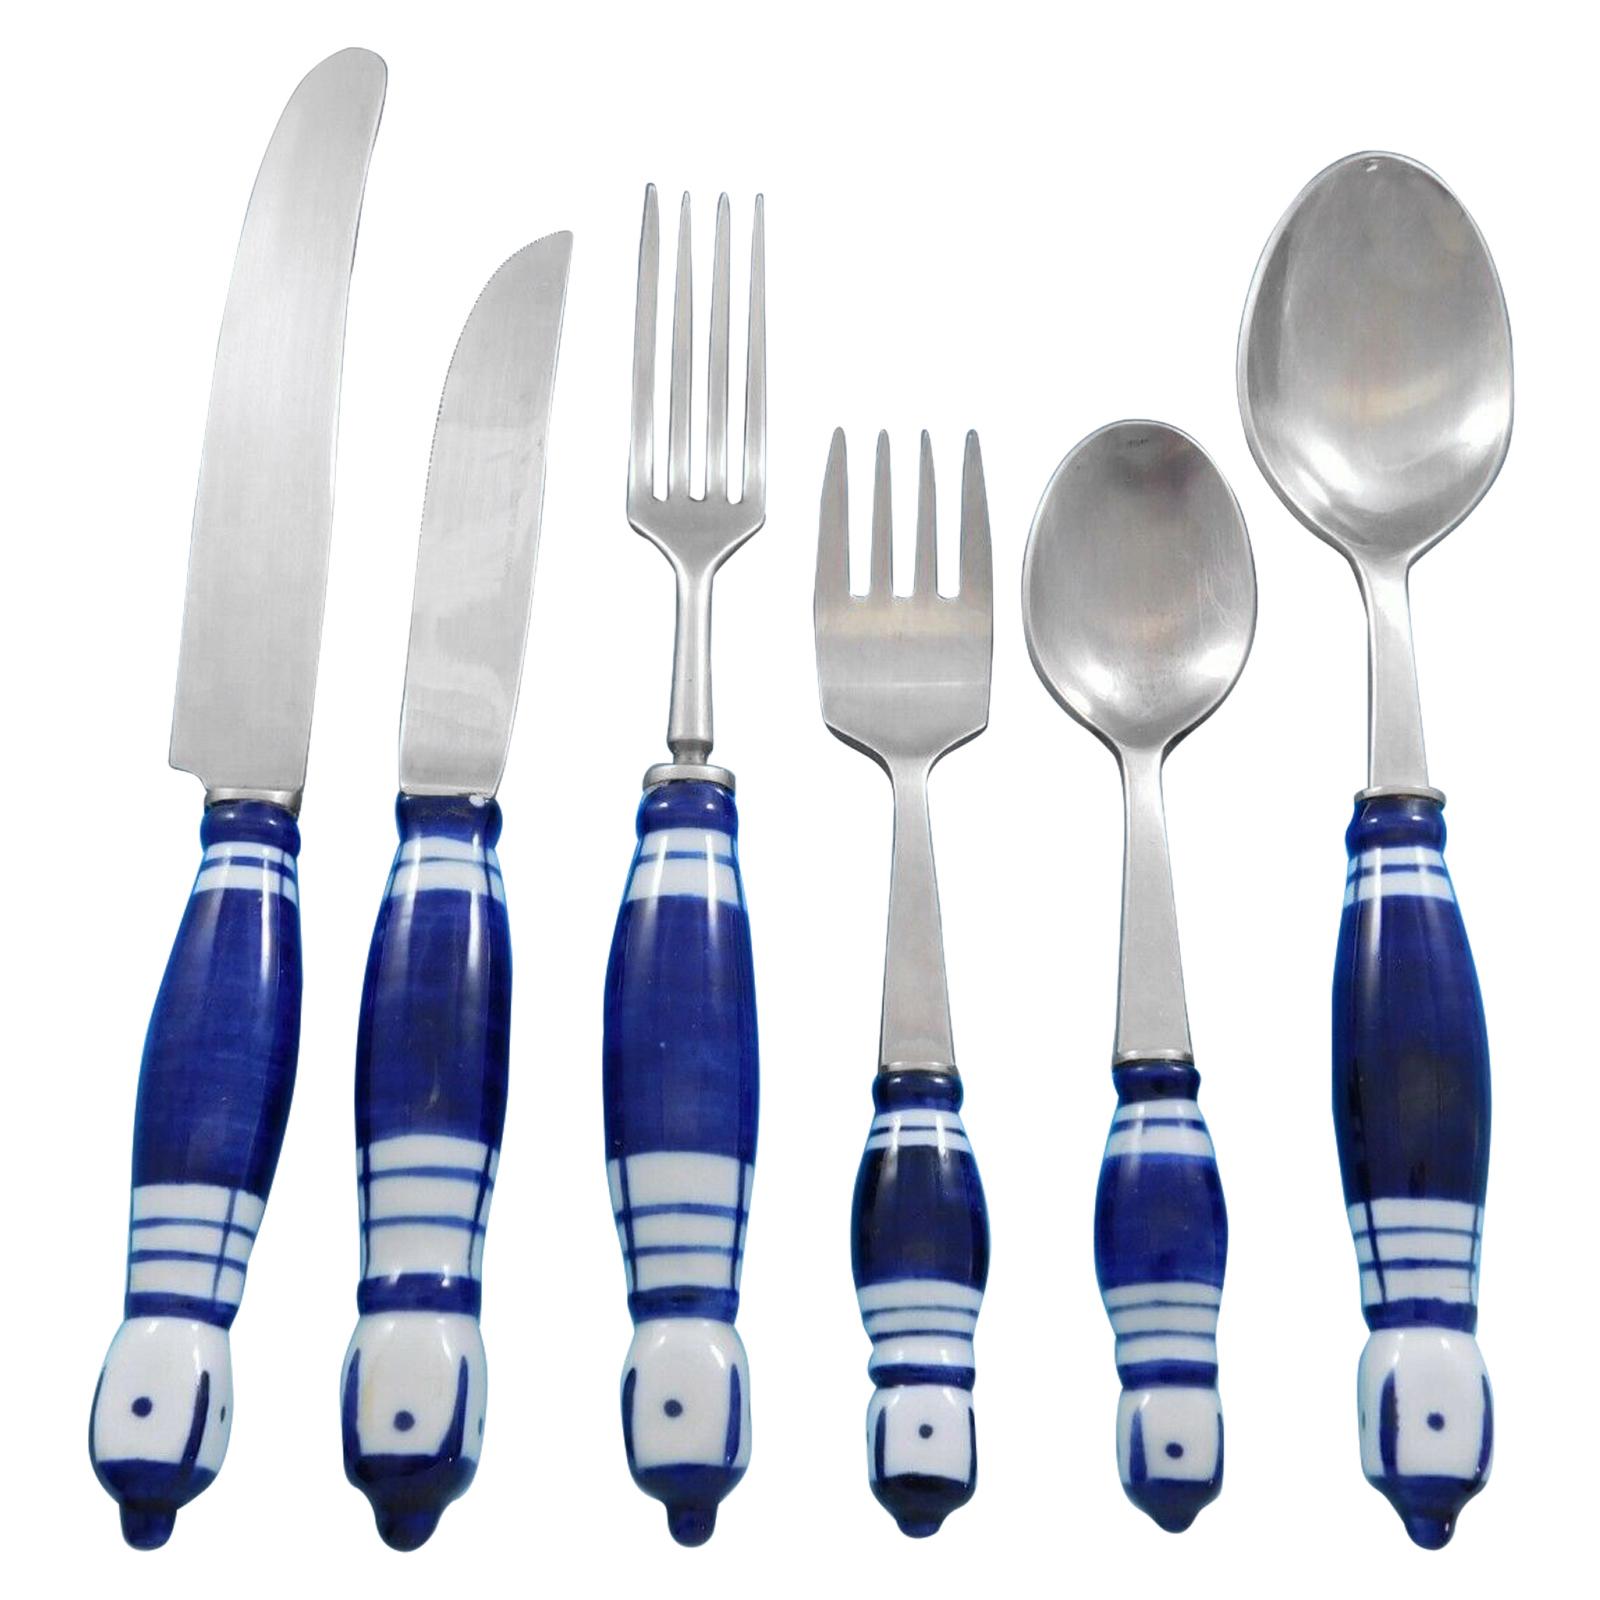 Grill Blue by Rosenthal Stainless and Porcelain Flatware Service Set 52 Pcs